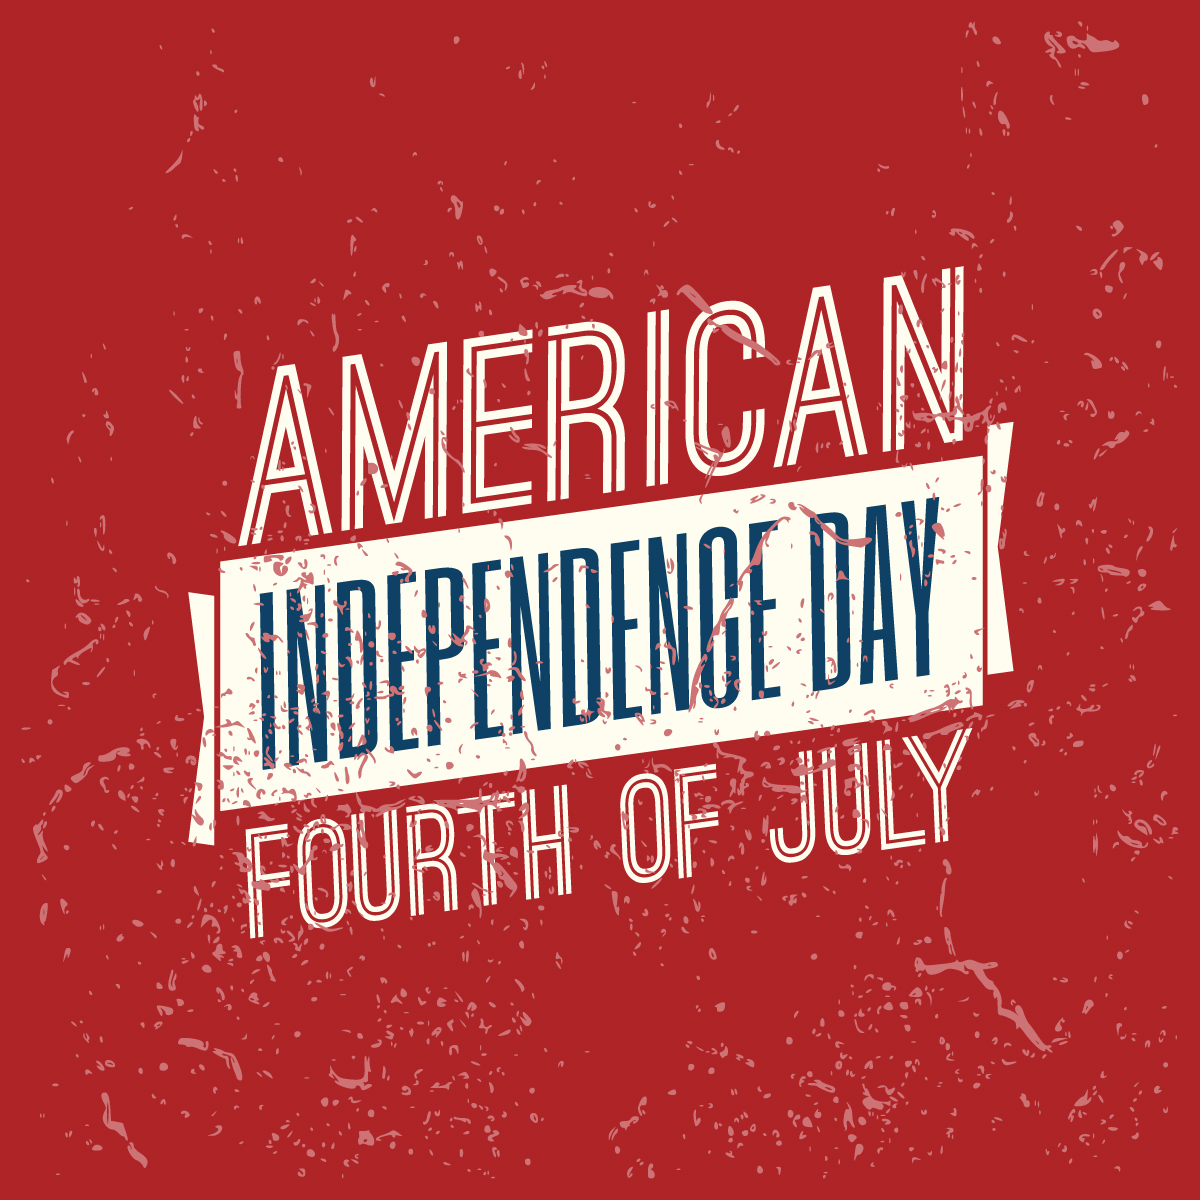 Why is Independence Day celebrated on July 4th? The Continental Congress declared its independence from Great Britain on July 2, 1776. If that date raises an eyebrow, it should. Independence Day in the United States has long been celebrated on July 4th, which would seem to be two days late.